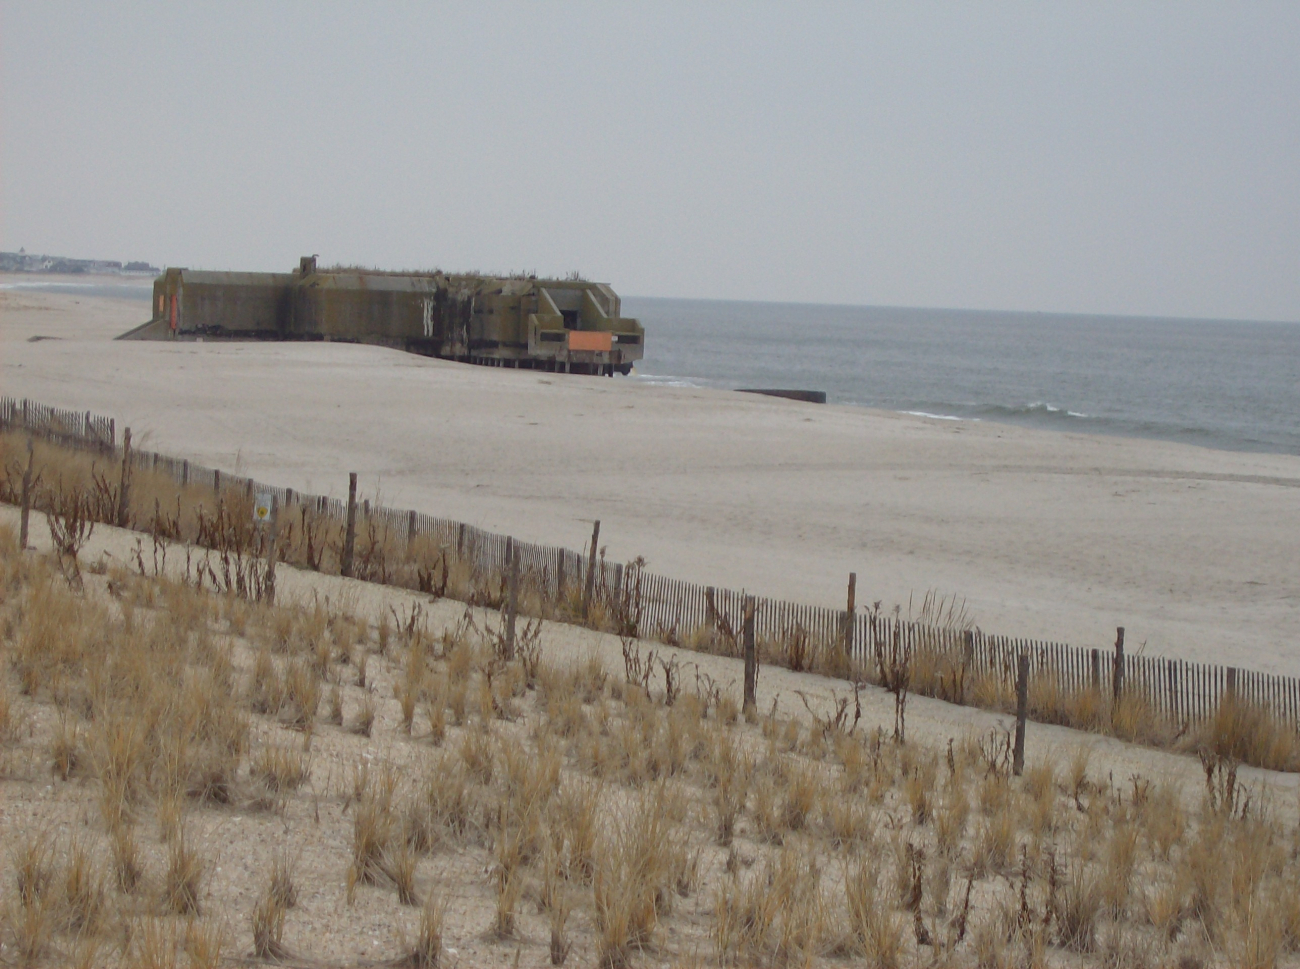 World War II Coast Artillery bunker exposed by retreating dune line at Cape May